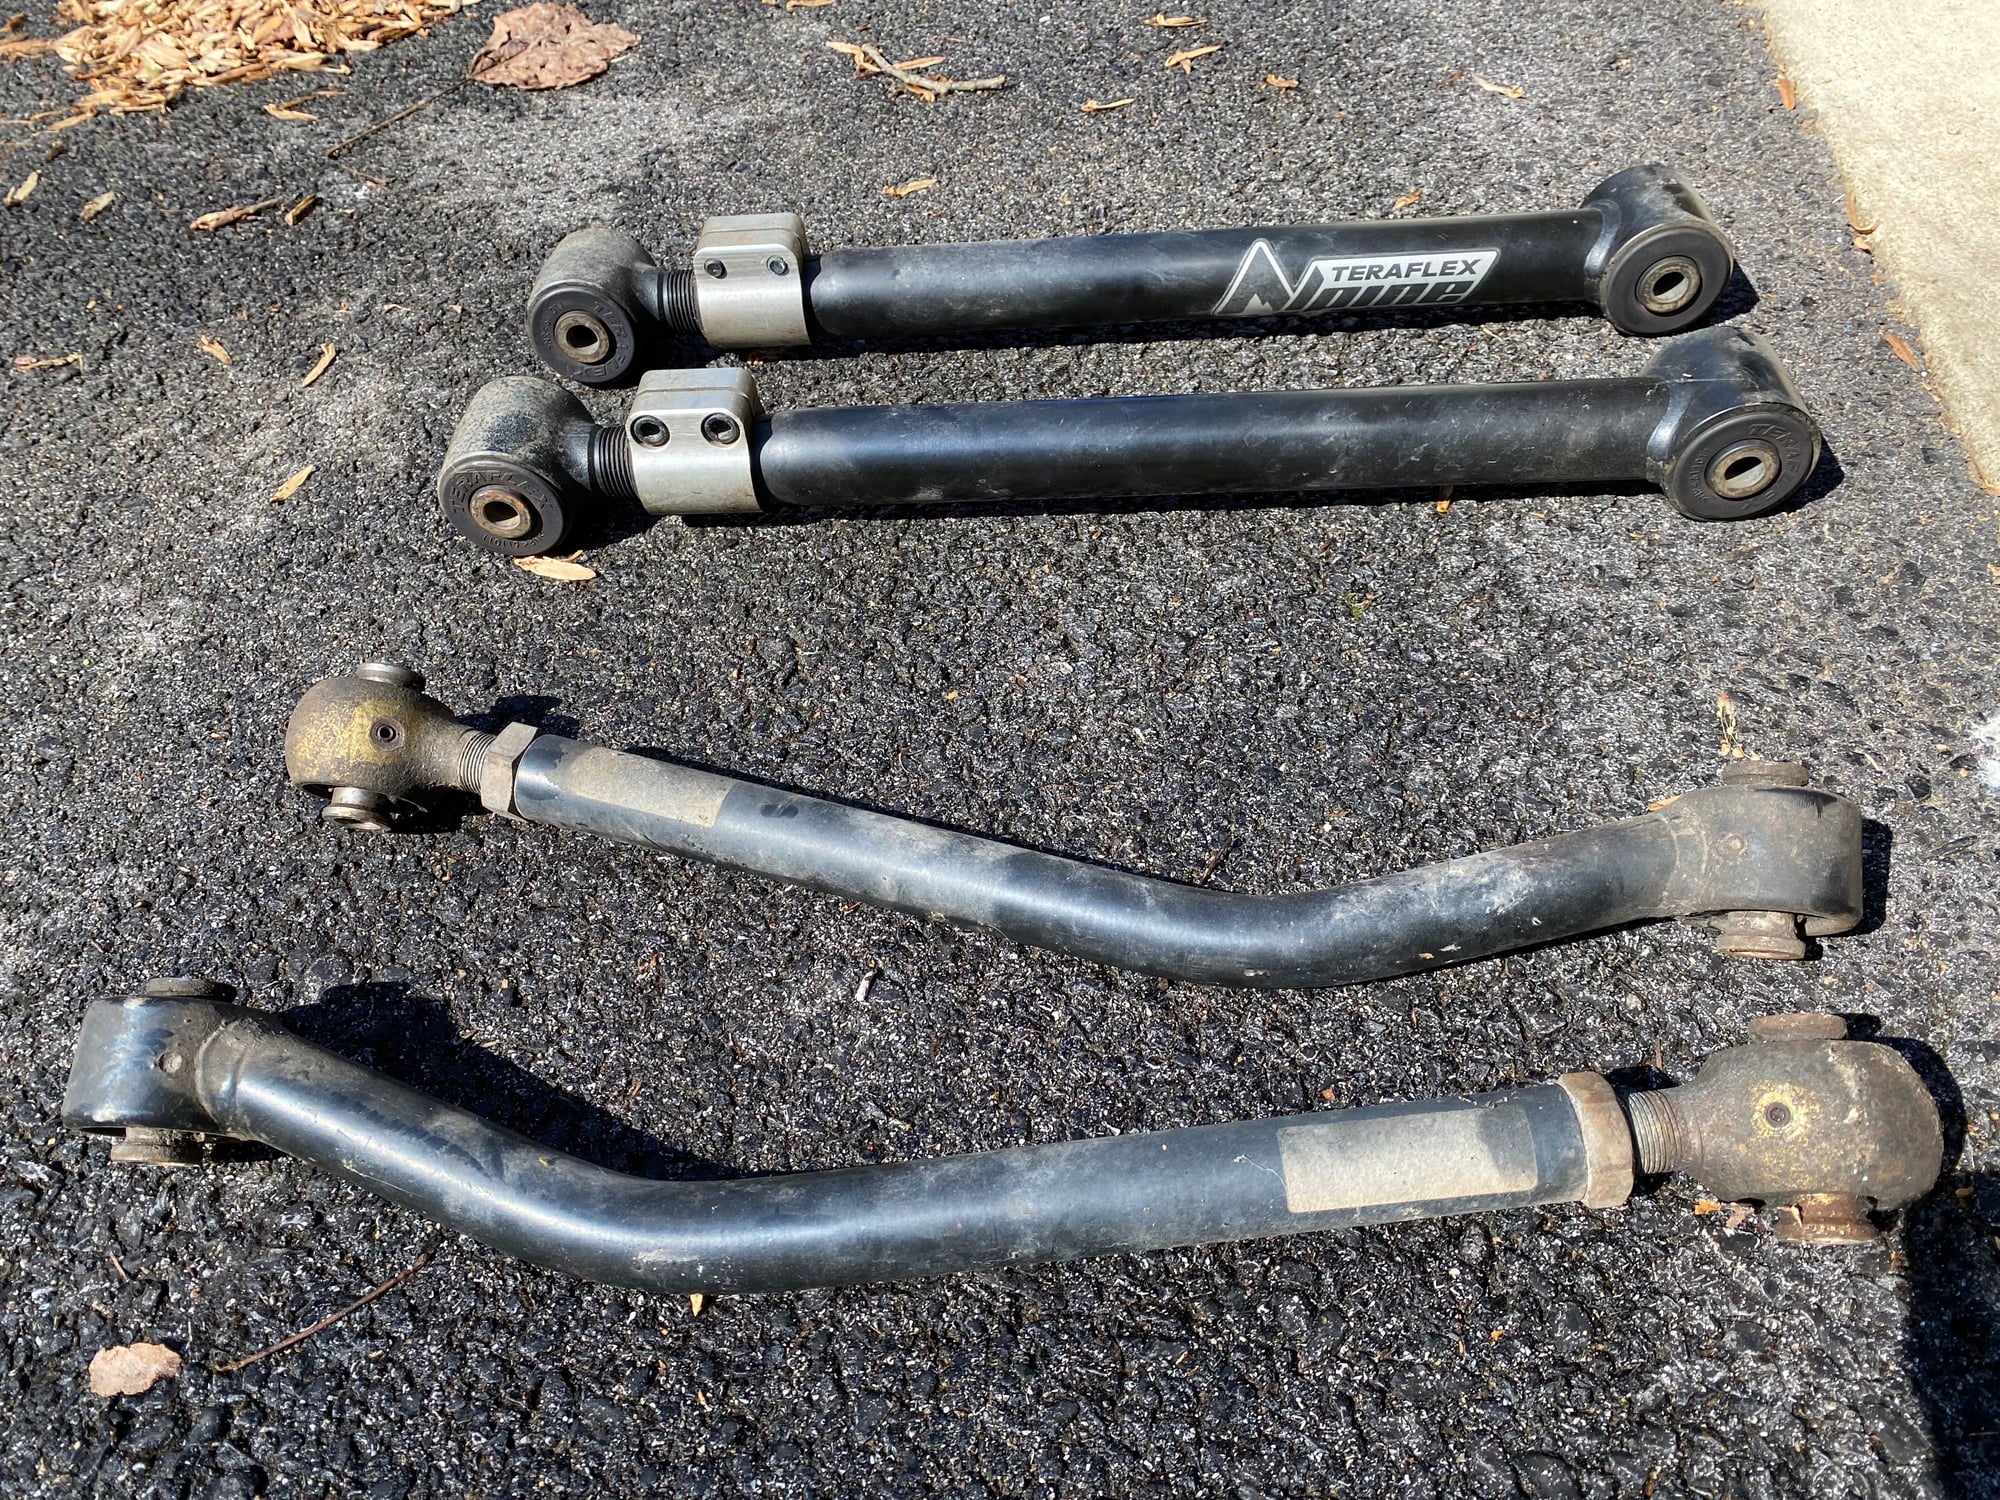 Steering/Suspension - JK rear adjustable control arms (Teraflex Alpine lowers, JKS uppers) - Used - 2007 to 2017 Jeep Wrangler - Potomac, MD 20854, United States